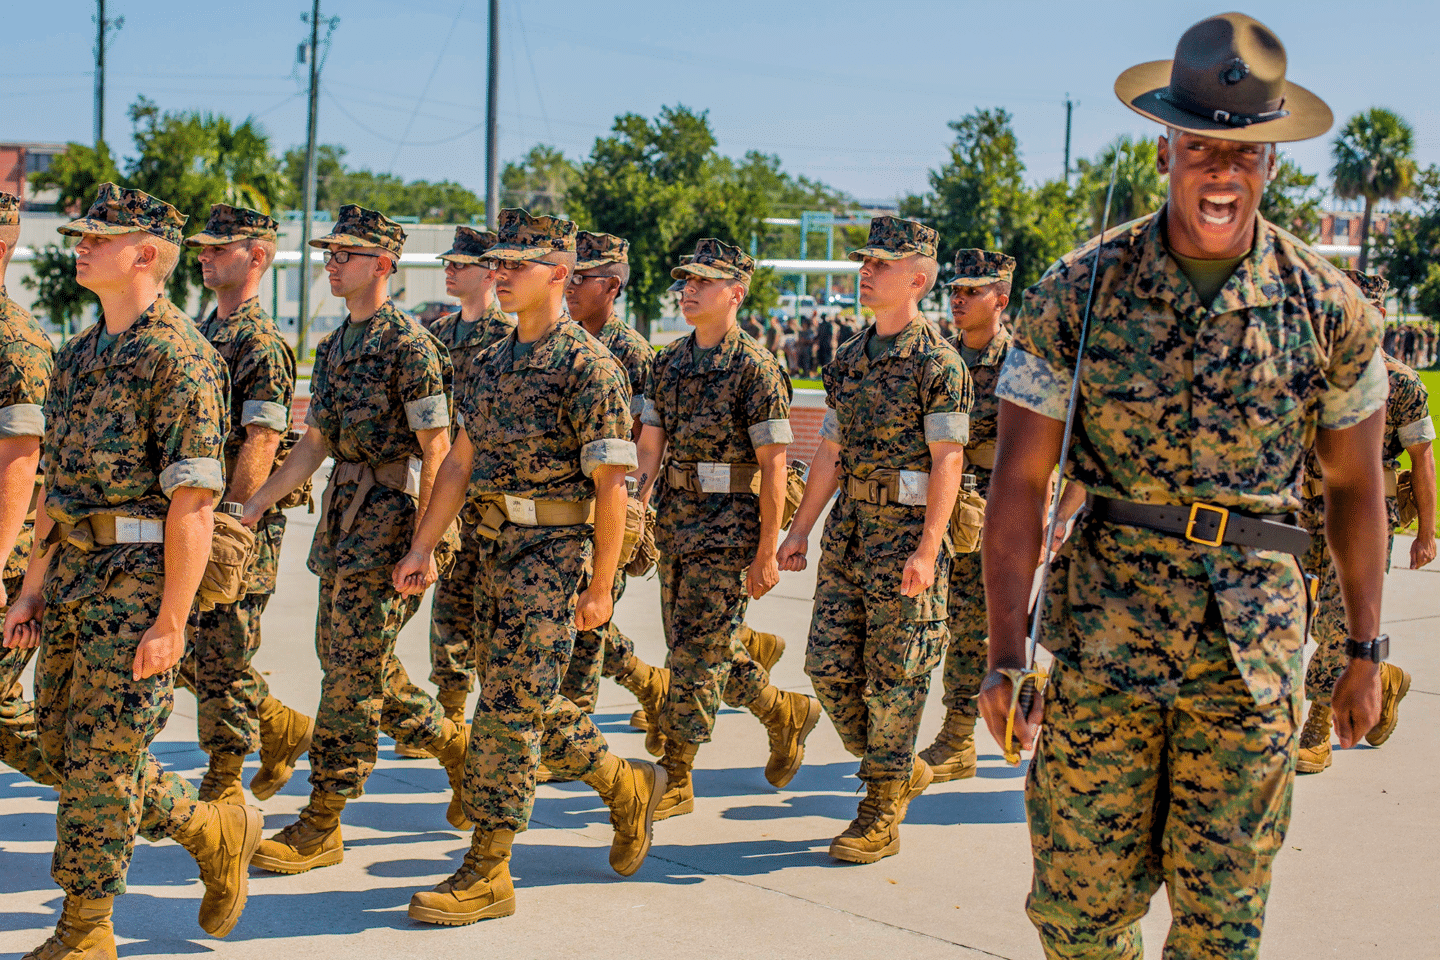 Marine Corps Boot Camp at Parris Island